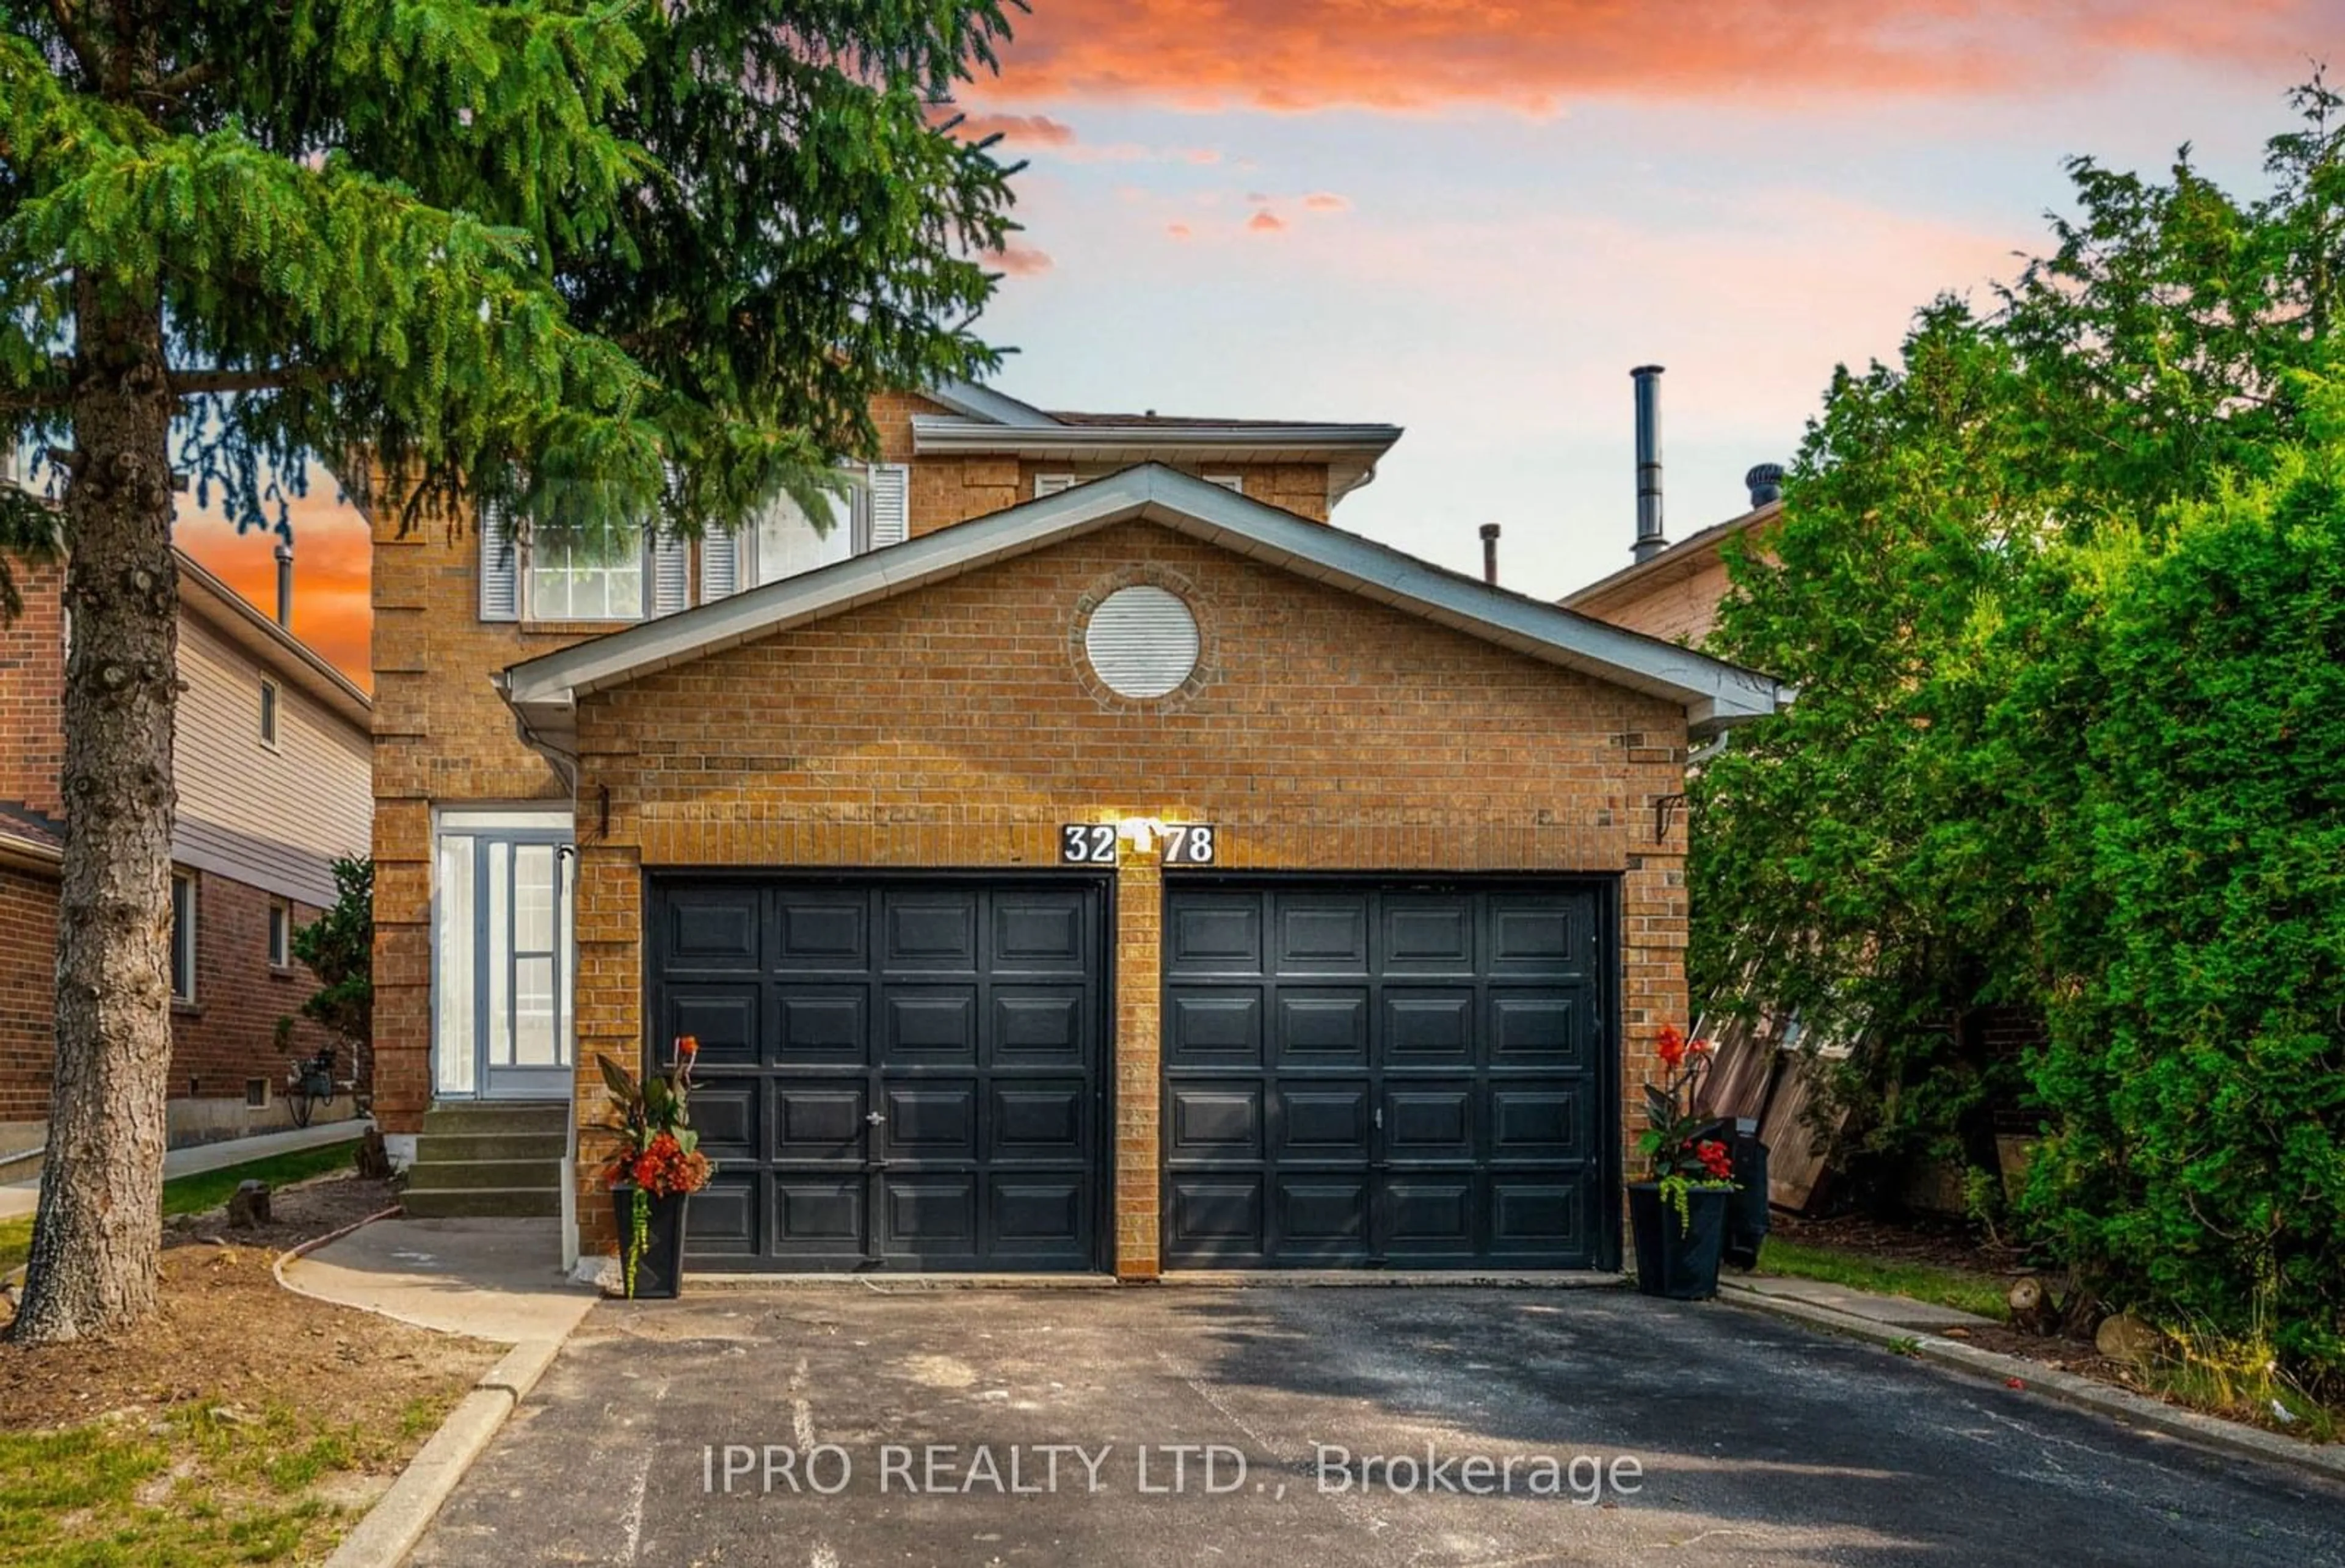 Home with brick exterior material for 3278 Wilmar Cres, Mississauga Ontario L5L 4B3